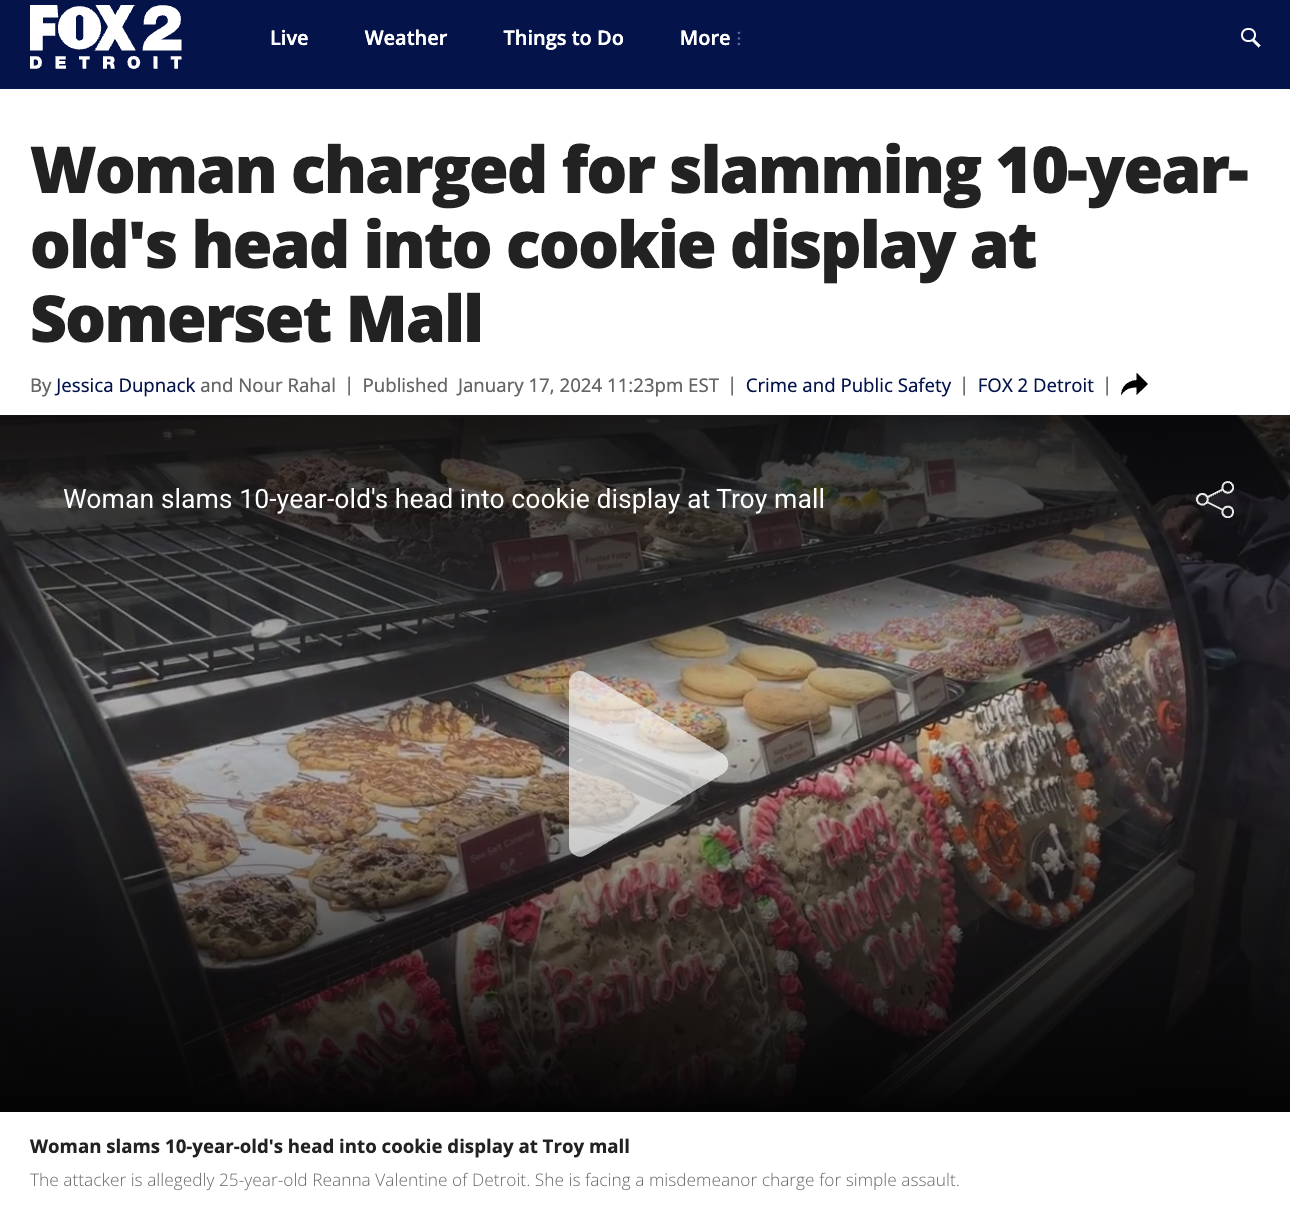 pan dulce - Fox 2 Live Weather Things to Do More Detroit Q Woman charged for slamming 10year old's head into cookie display at Somerset Mall By Jessica Dupnack and Nour Rahal | Published pm Est | Crime and Public Safety | Fox 2 Detroit Woman slams 10yearo